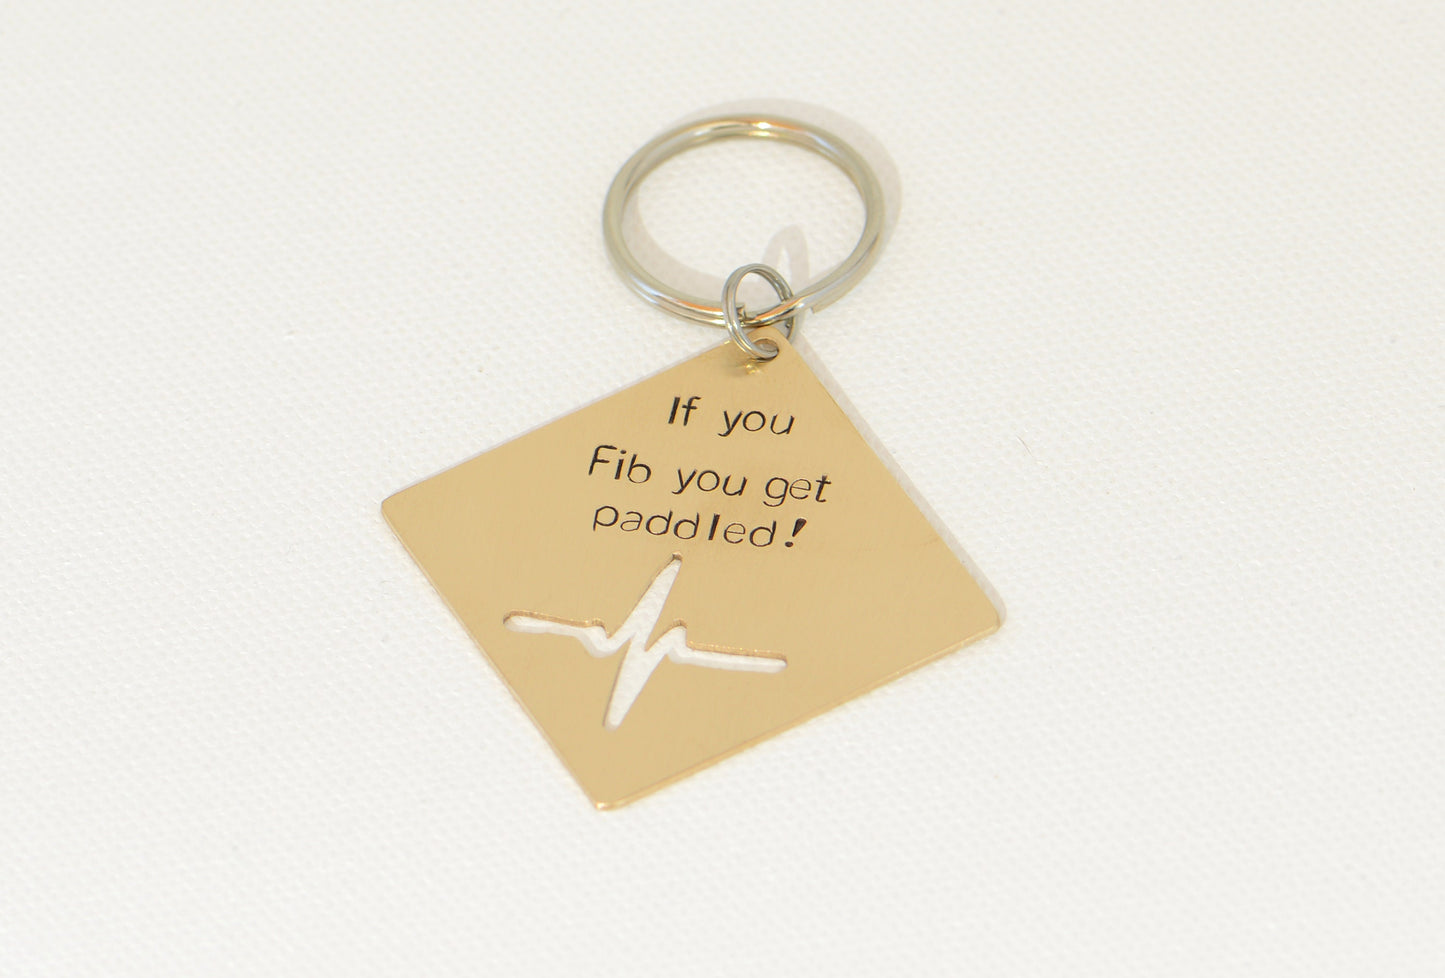 If you Fib you get paddled bronze key chain with heartbeat